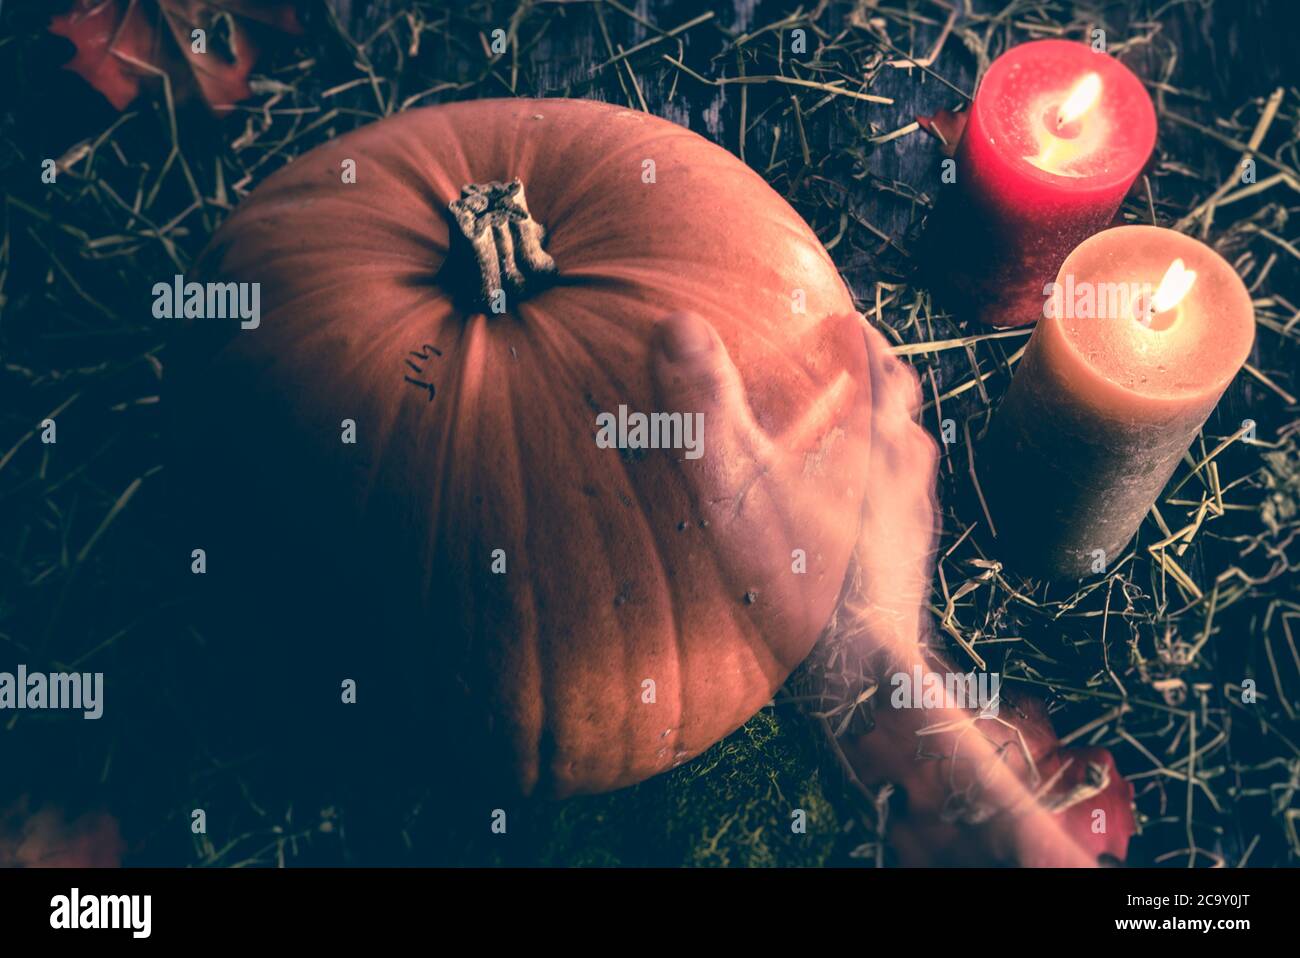 A transparent ghost hand reaching out to touch a big orange pumpkin on dark rustic wood background with hey and candles with burning flames Stock Photo